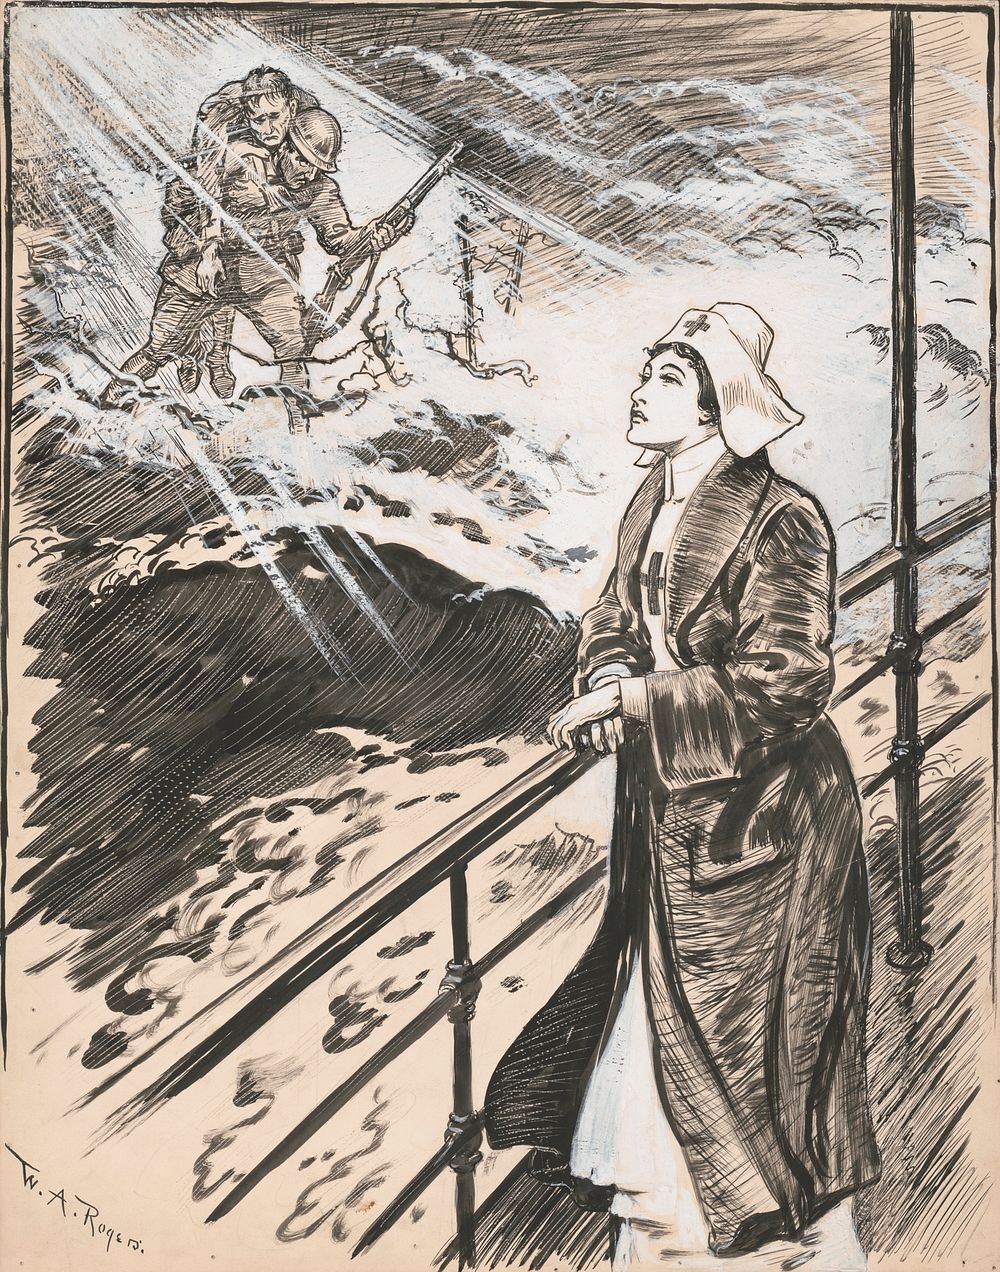 Nurse standing at the railing of a ship, has a vision of wounded soldiers across a stormy sea / W.A. Rogers. (between 1914…